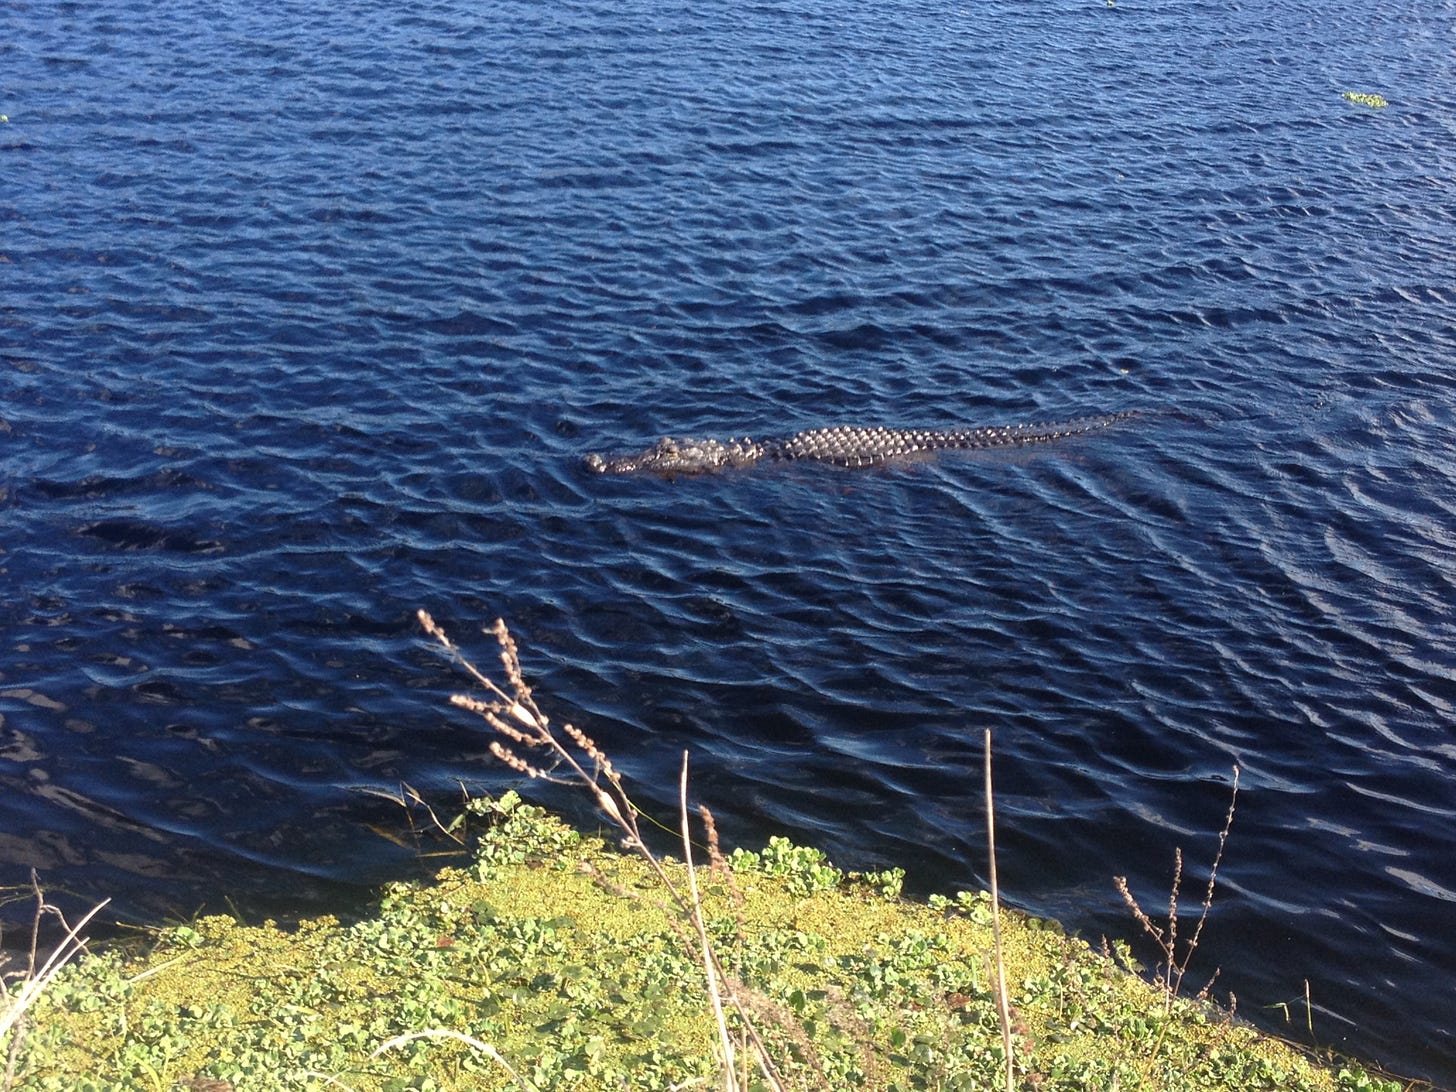 Twelve foot alligator swimming alone in a blue body of water. His tail is partially submerged, but his large snout and abdominal area can clearly be seen. The edge of the shore, covered in small green plants and a few dried out stalks that have gone to seed is in the foreground.